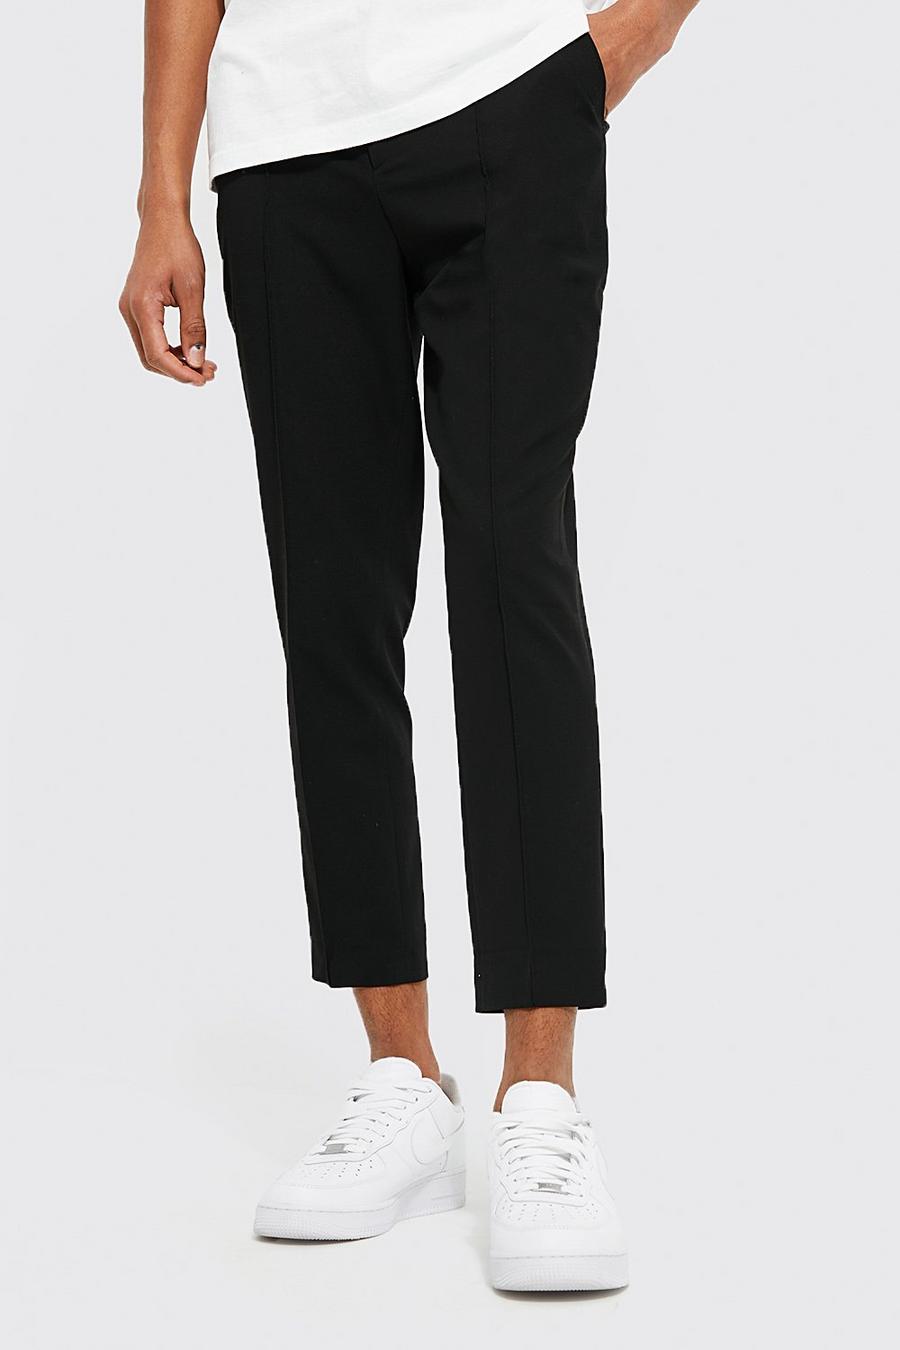 Black nero Skinny Plain Tapered Smart Trouser With Pintuck